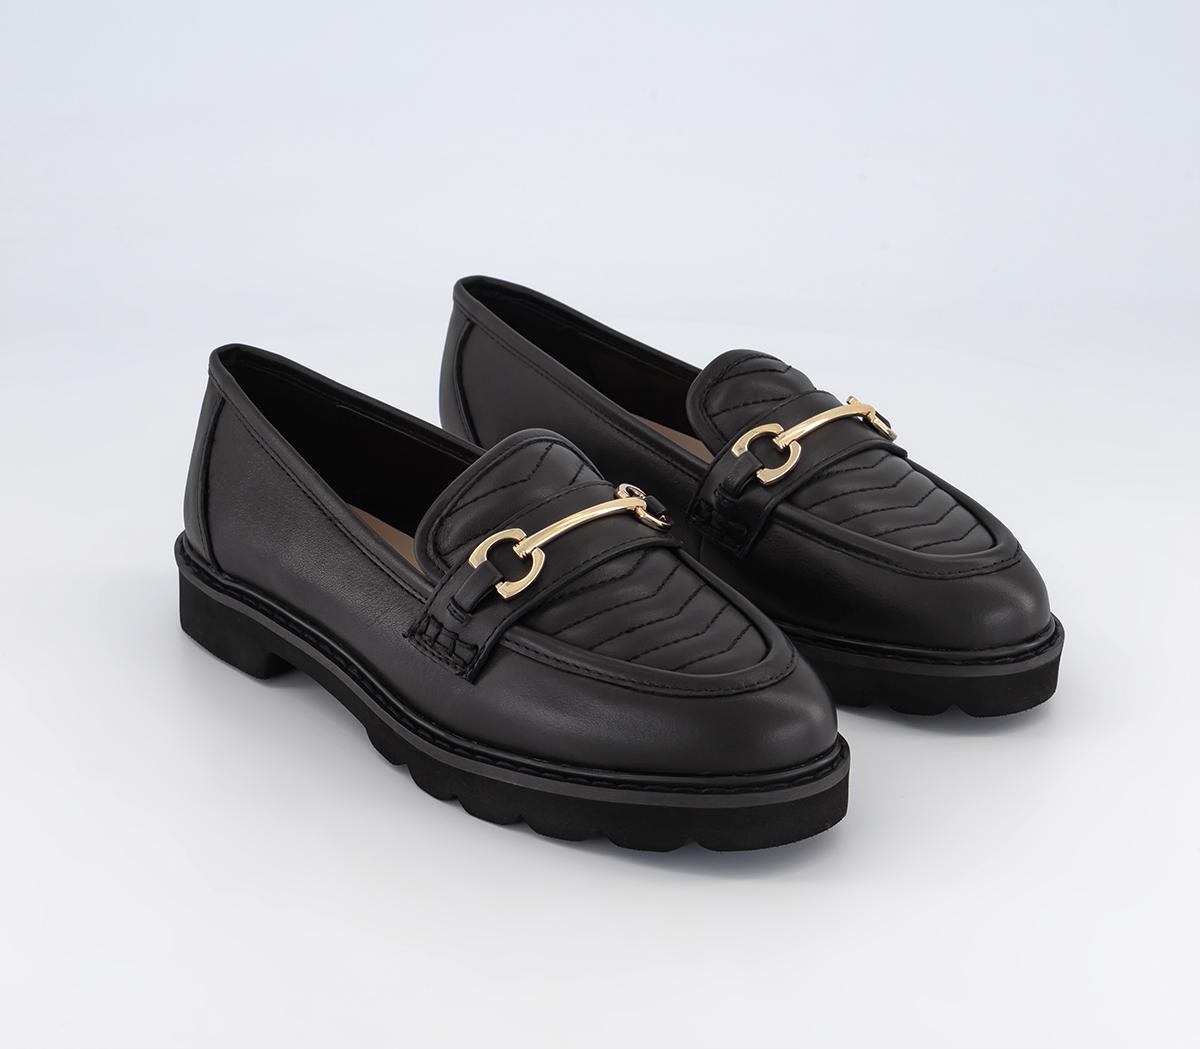 OFFICE Frill Leather Loafers Black Leather - Flat Shoes for Women